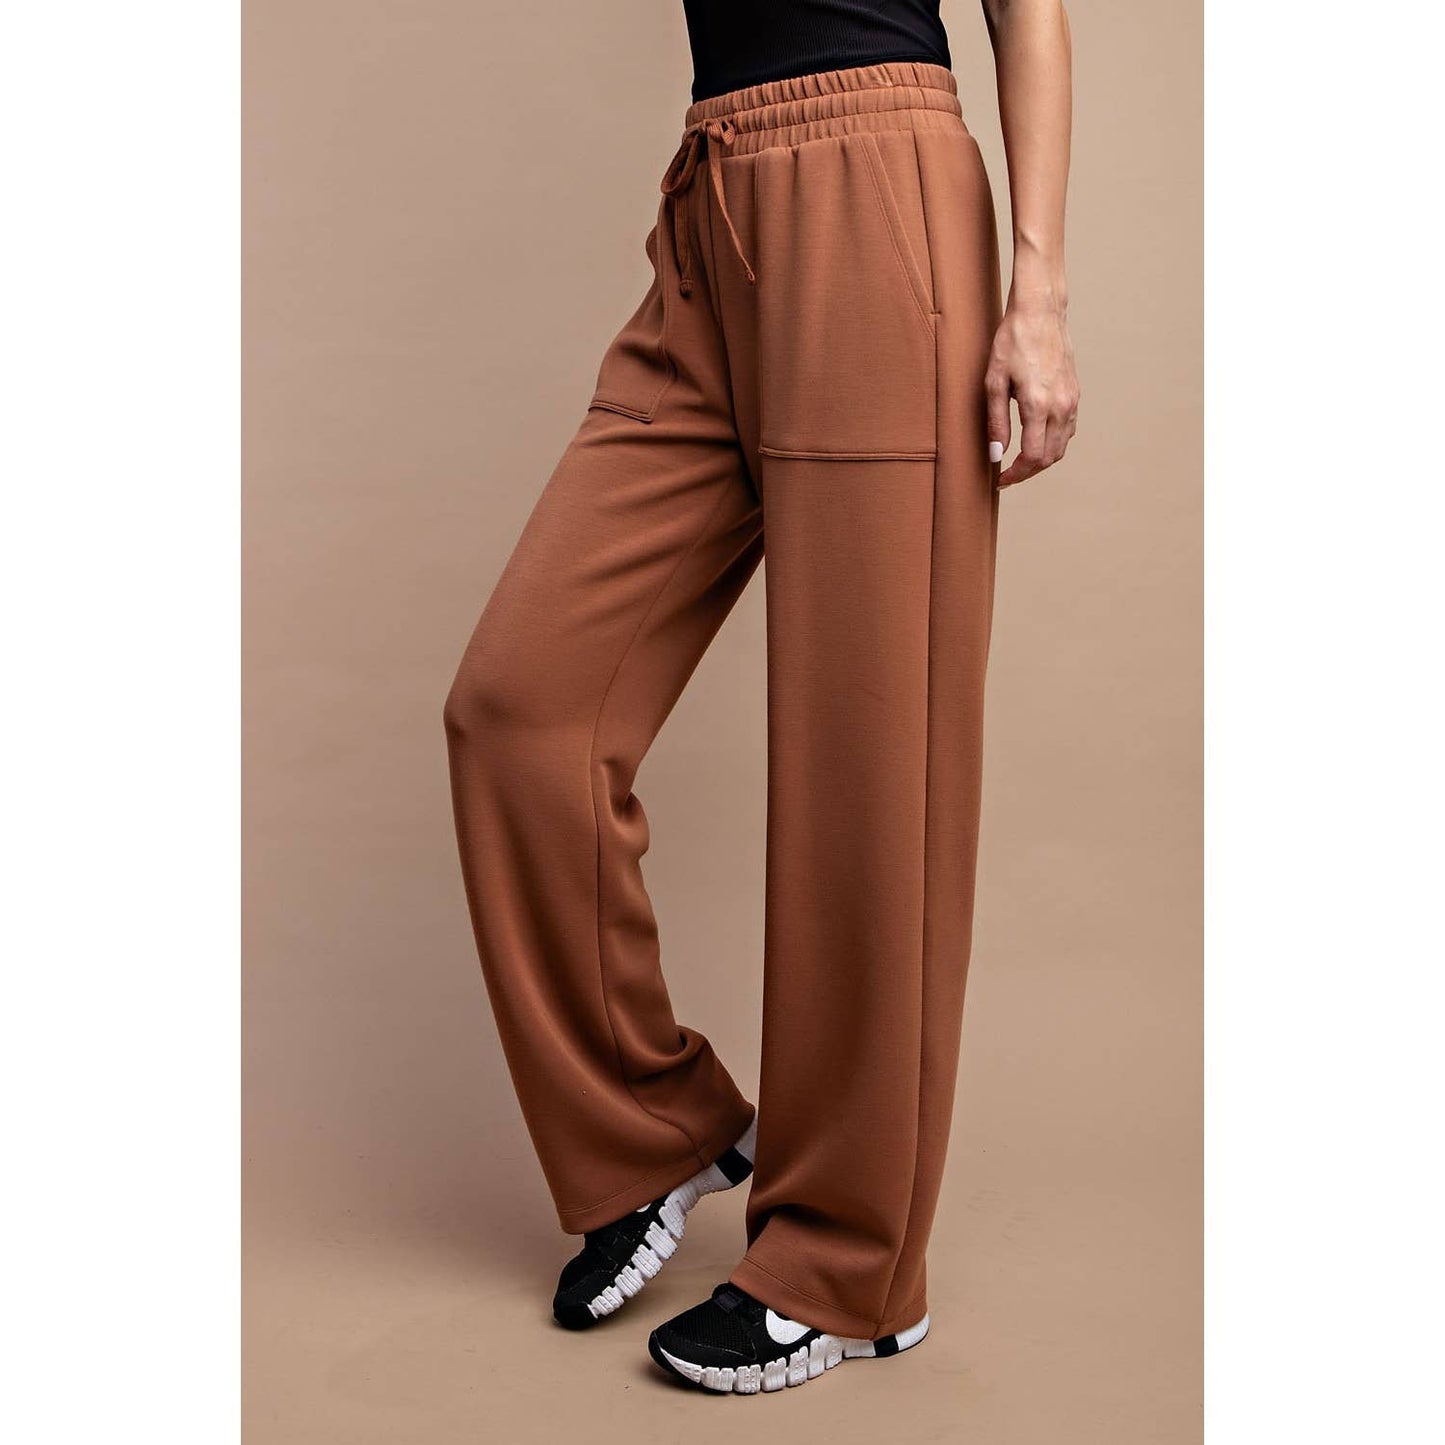 MODAL POLY SPAN STRAIGHT LOUNGE PANTS WITH POCKETS (Spanx Air